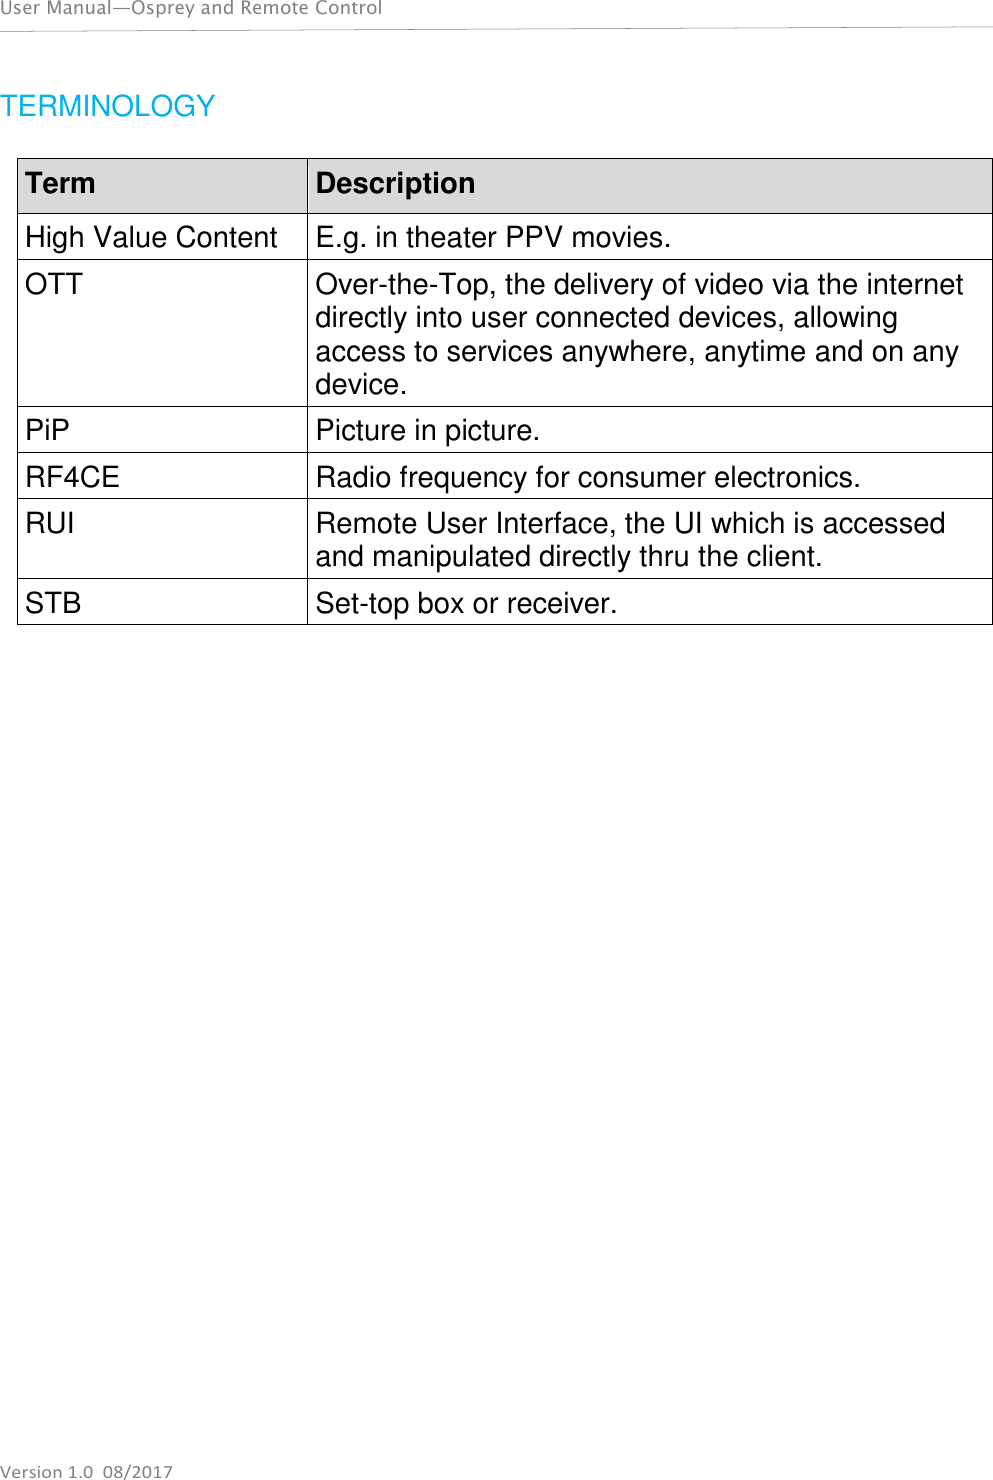   User Manual—Osprey and Remote Control    Version 1.0  08/2017 TERMINOLOGY  Term Description High Value Content E.g. in theater PPV movies. OTT Over-the-Top, the delivery of video via the internet directly into user connected devices, allowing access to services anywhere, anytime and on any device. PiP Picture in picture. RF4CE Radio frequency for consumer electronics. RUI Remote User Interface, the UI which is accessed and manipulated directly thru the client. STB Set-top box or receiver. 